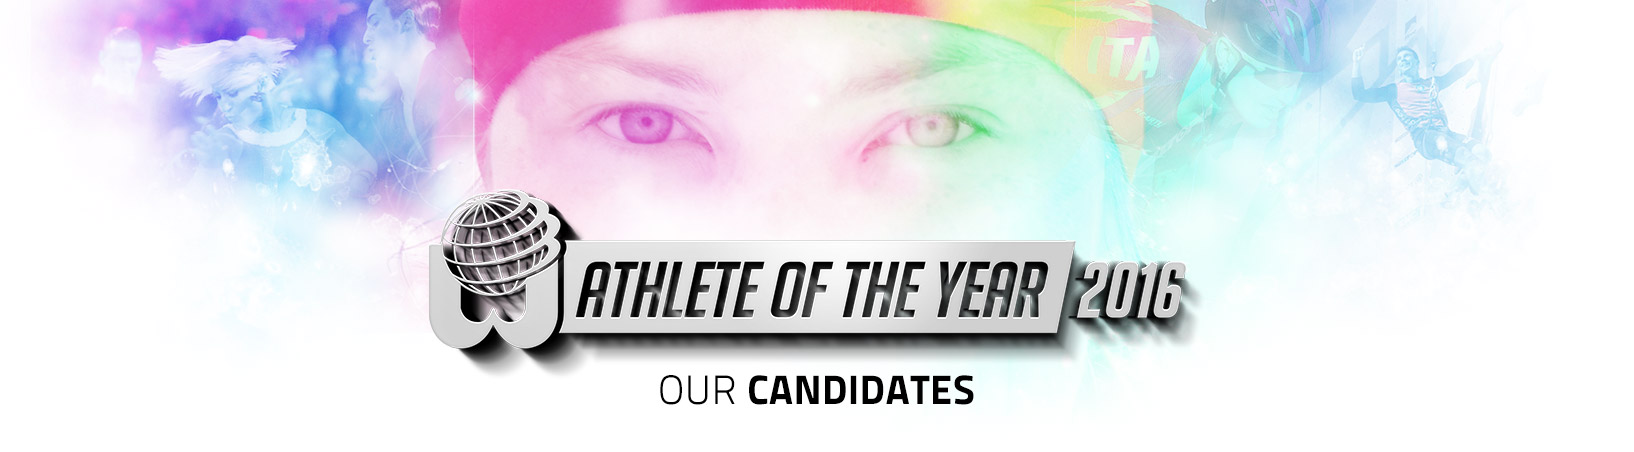 Athlete of the year 2016 vote banner